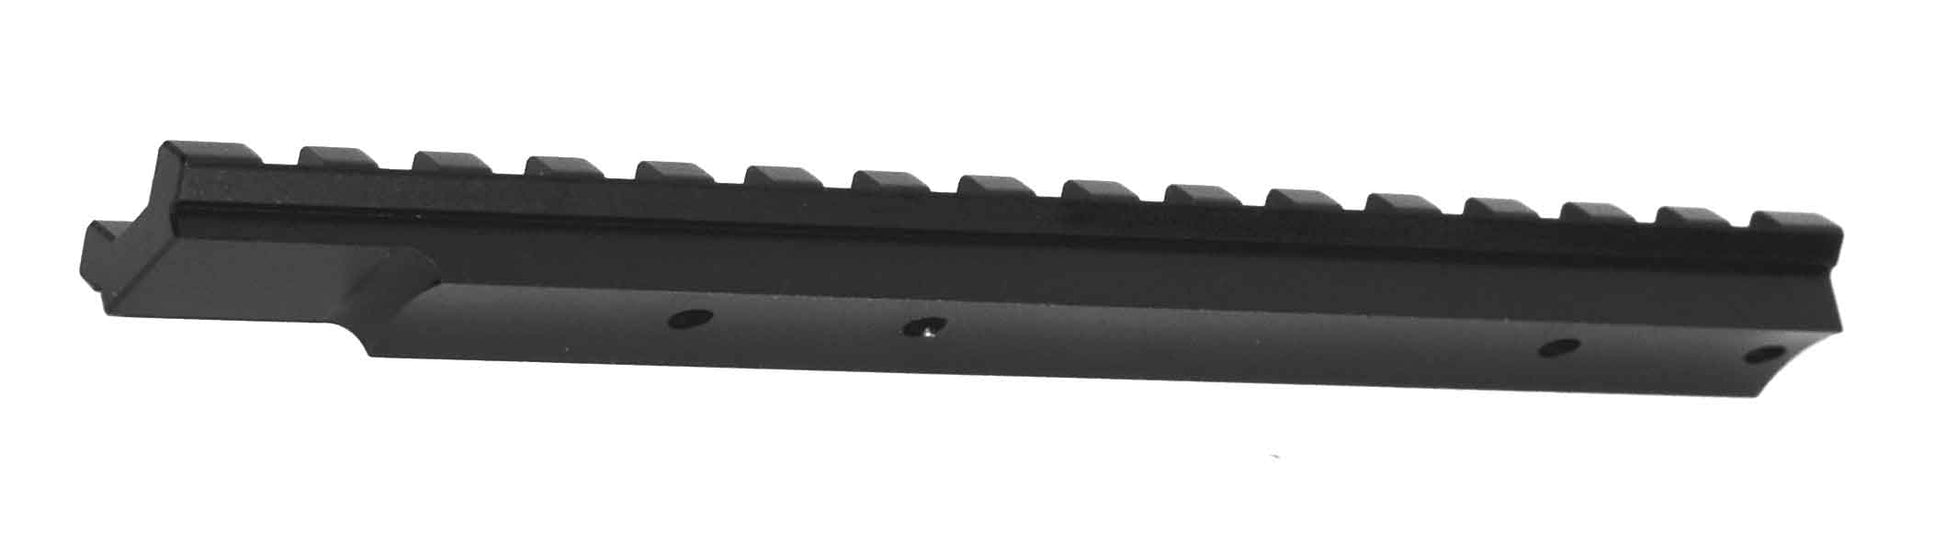 aluminum picatinny rail mount for winchester 1300.